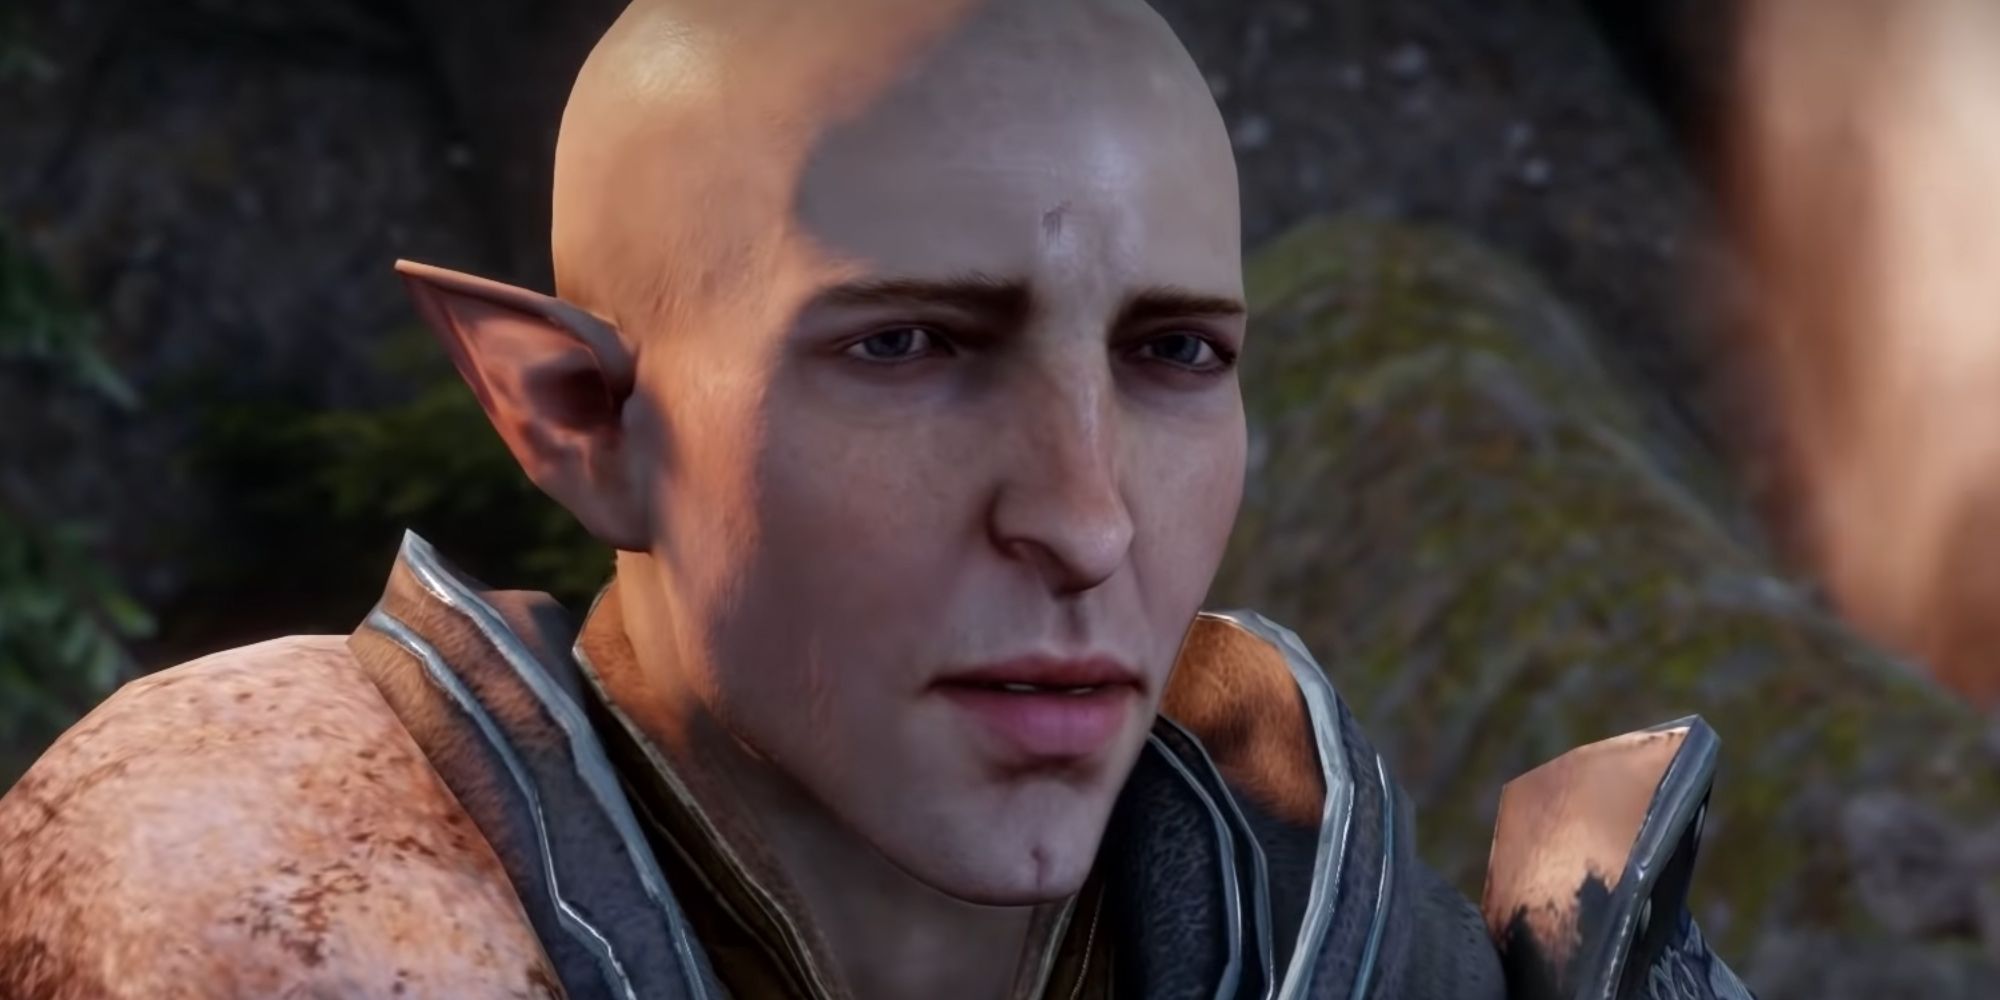 Solas is a snake from Dragon Age